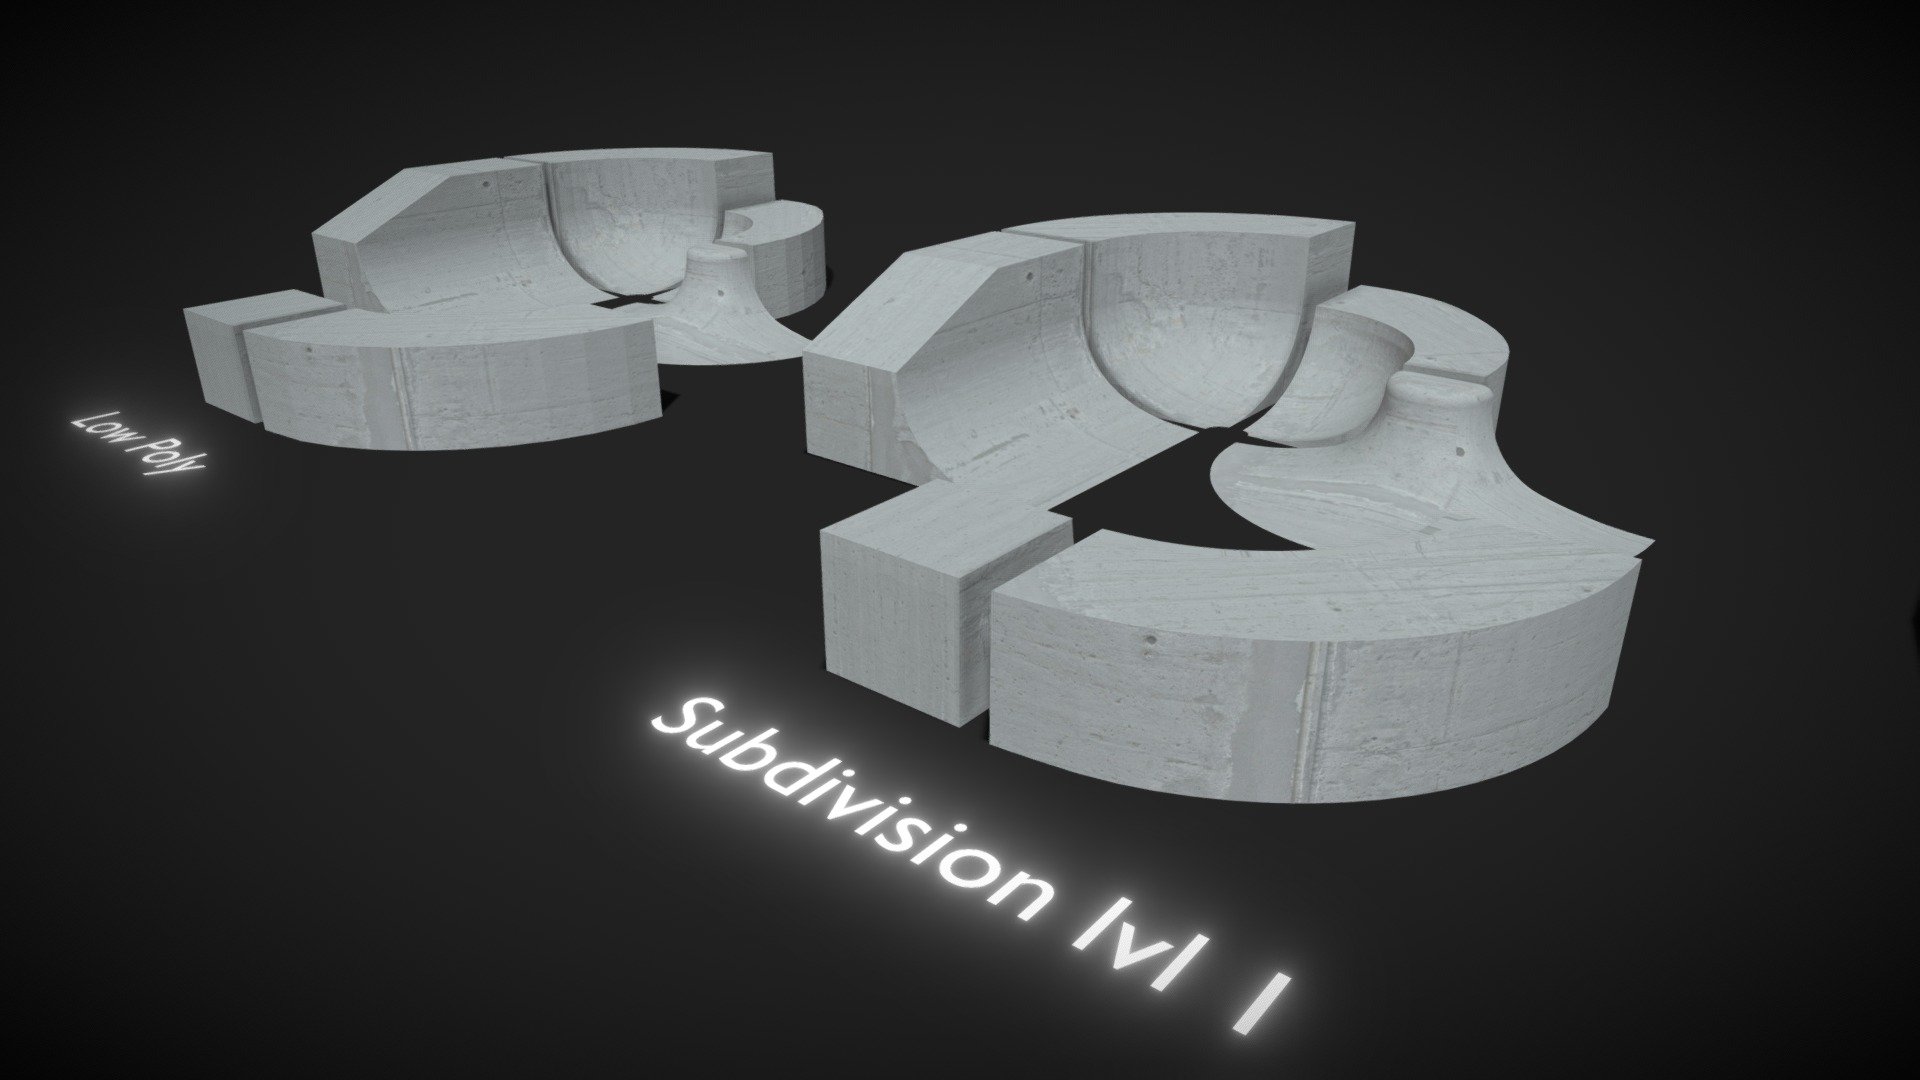 Subdivision Ready Modular Skatepark Bowl Kit.
Made from scratch on Blender.
Create your own skatepark bowls combinations with these 6 modular pieces!

Verts: 45086 Faces: 4064 Tris: 7873

Perfect to build your own skateparks for your game or to 3d print to play fingerskate with.
Textures are included 3d model